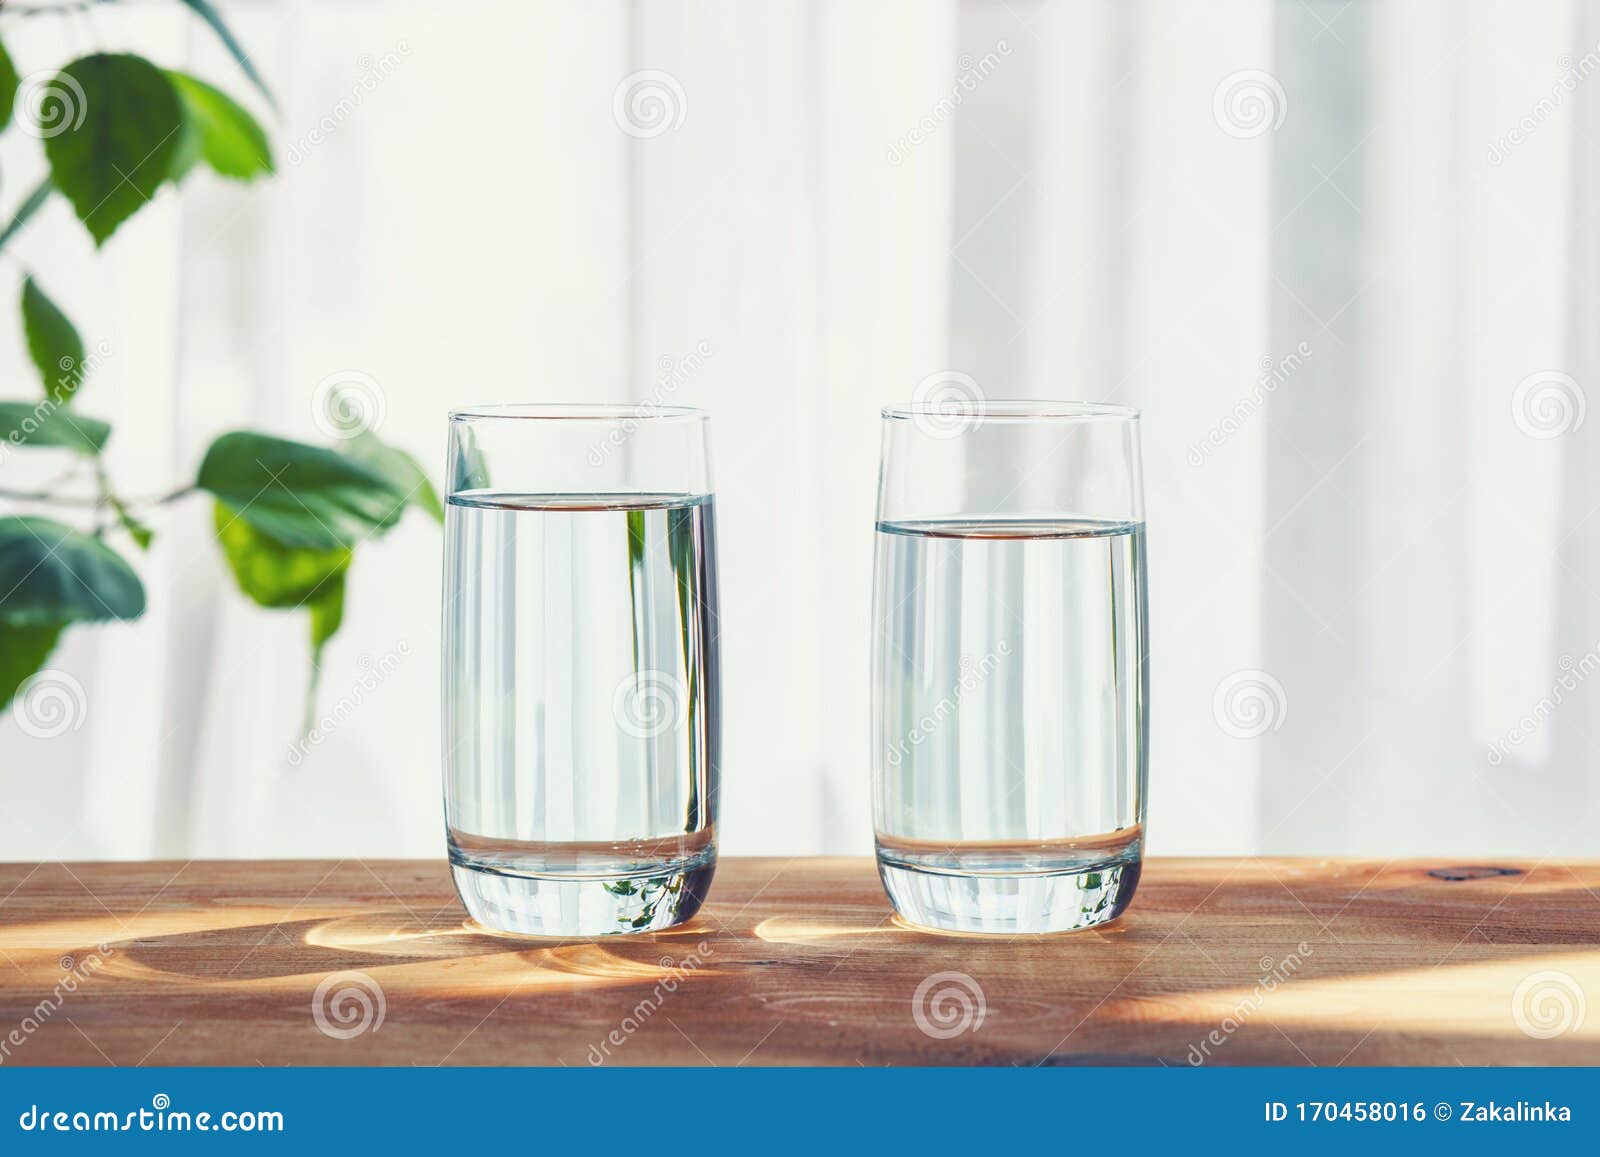 Hykler Fantasi binær Two Glasses of Water Standing on Wooden Table Inside Stock Photo - Image of  natural, morning: 170458016